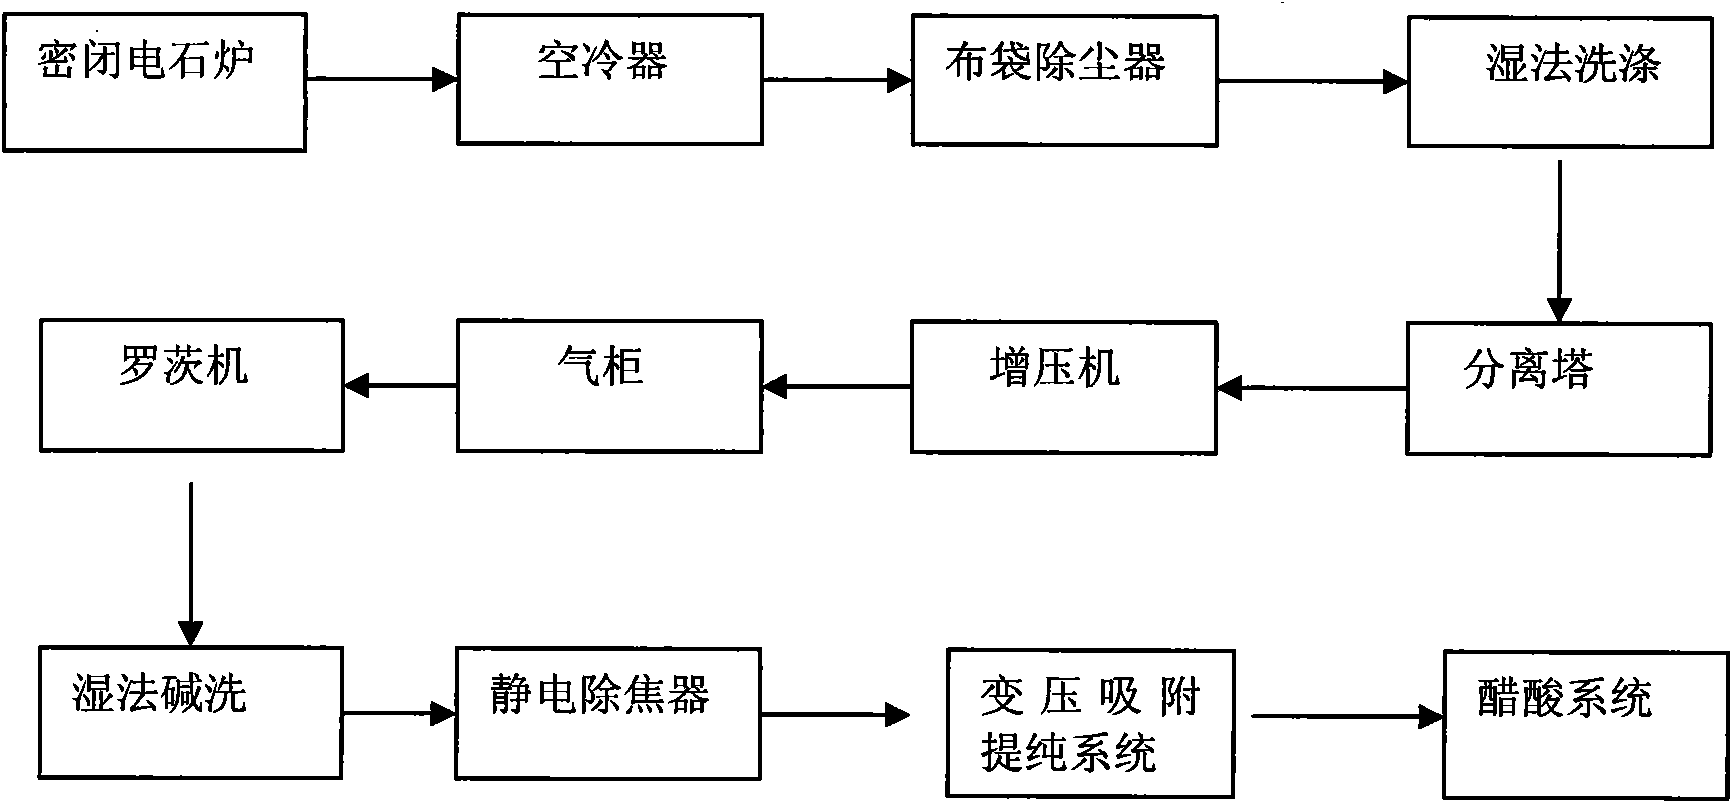 Process for producing acetic acid by utilizing tail gas of calcium carbide furnace